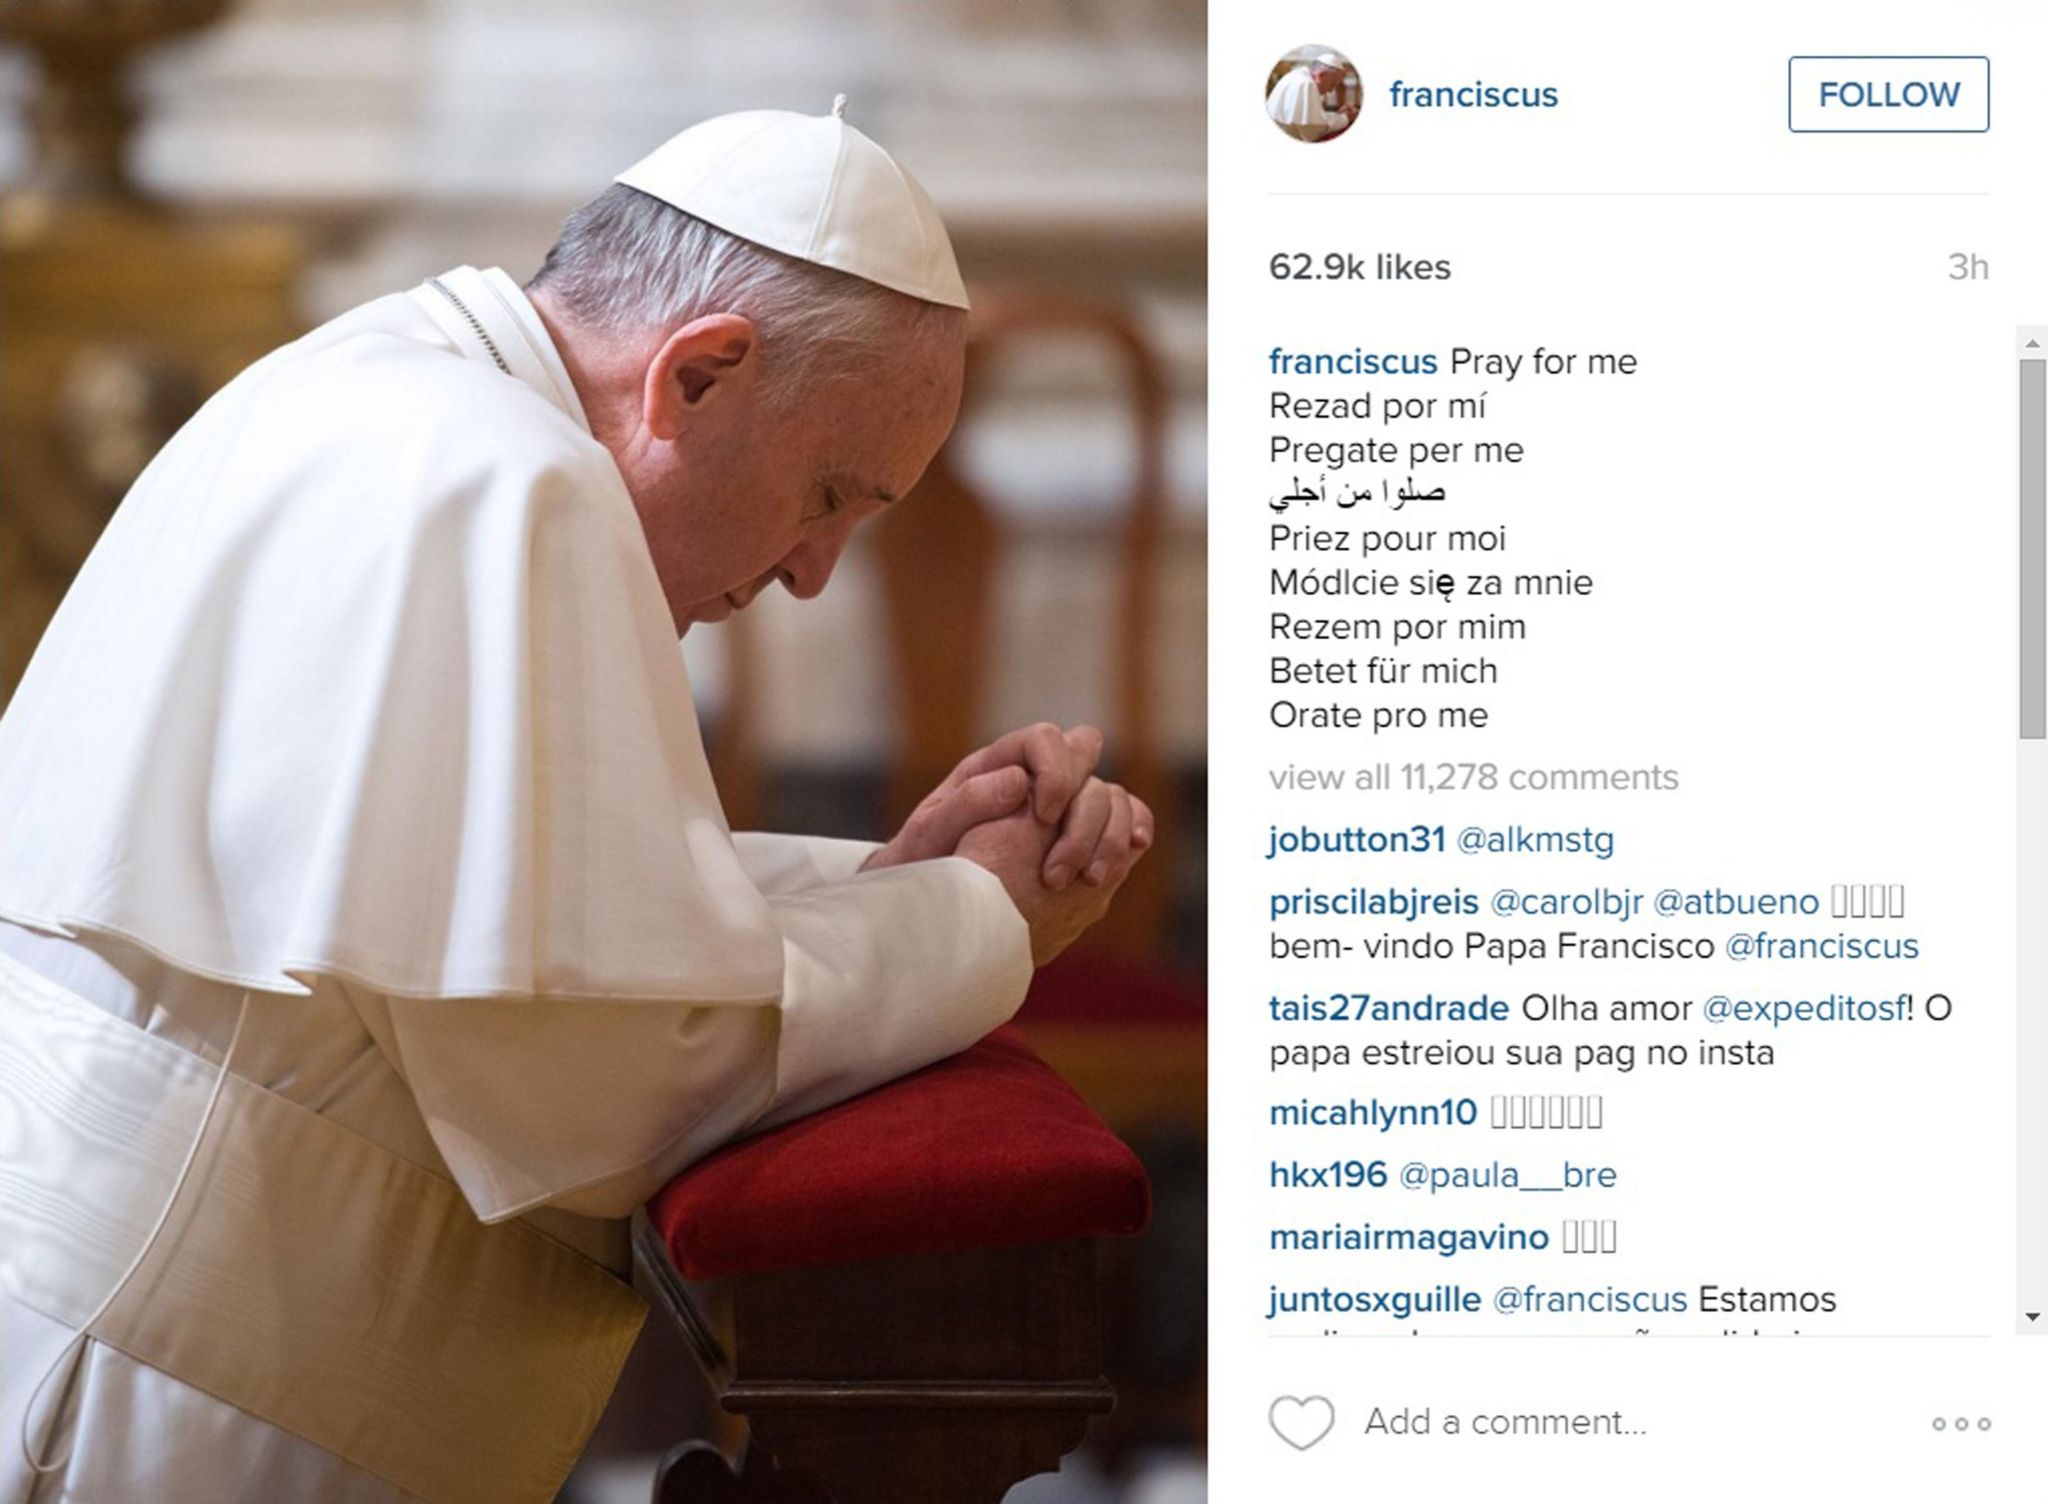 The Pope's first post on Instagram